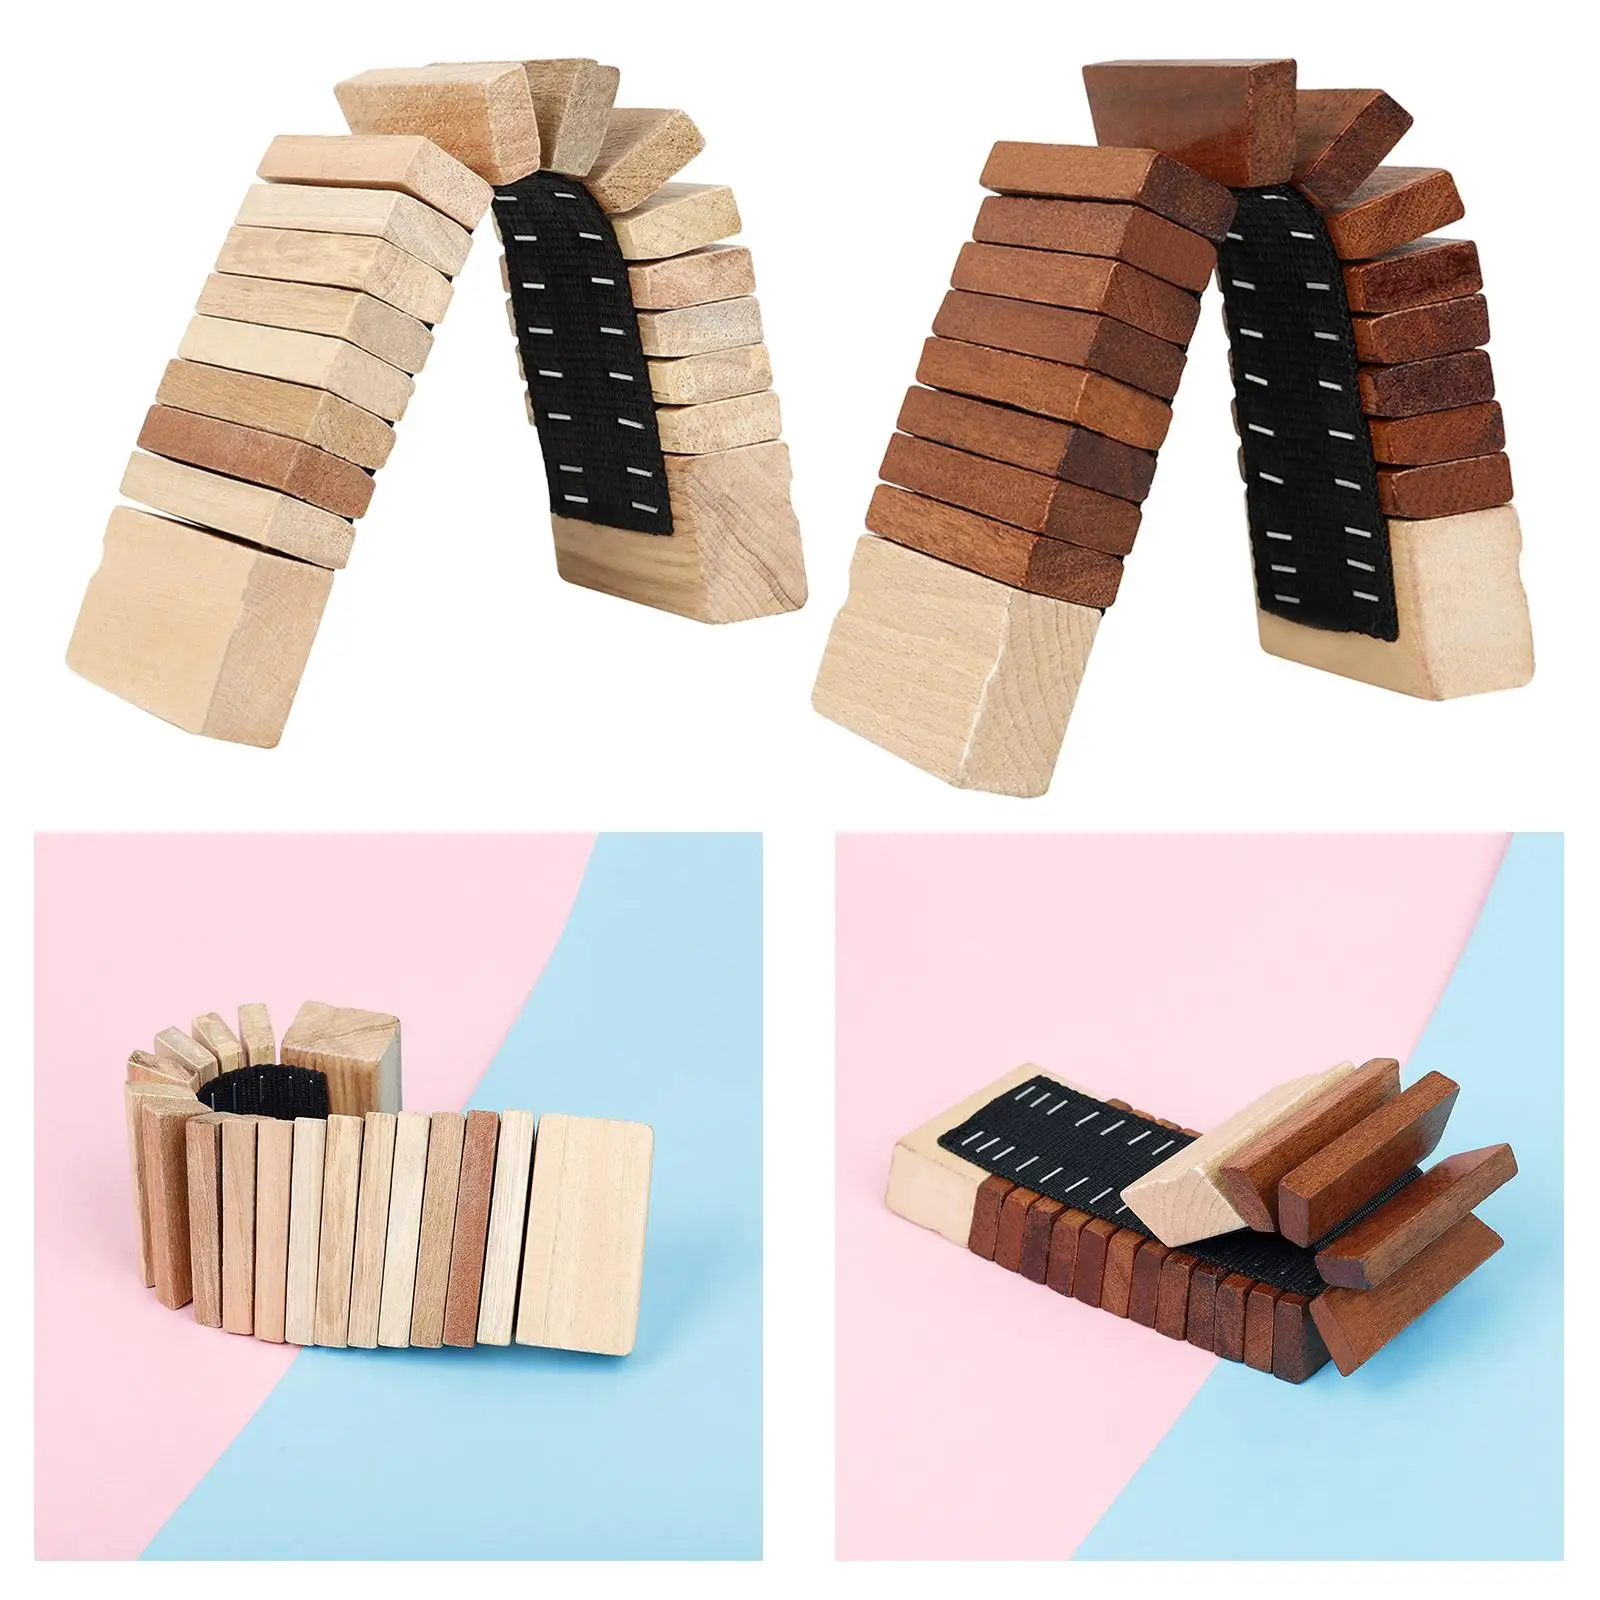 Wooden Clatter Percussion Instrument Musical Instruments Preschool Learning Education Toy Castanets Clapper Shaker for Children